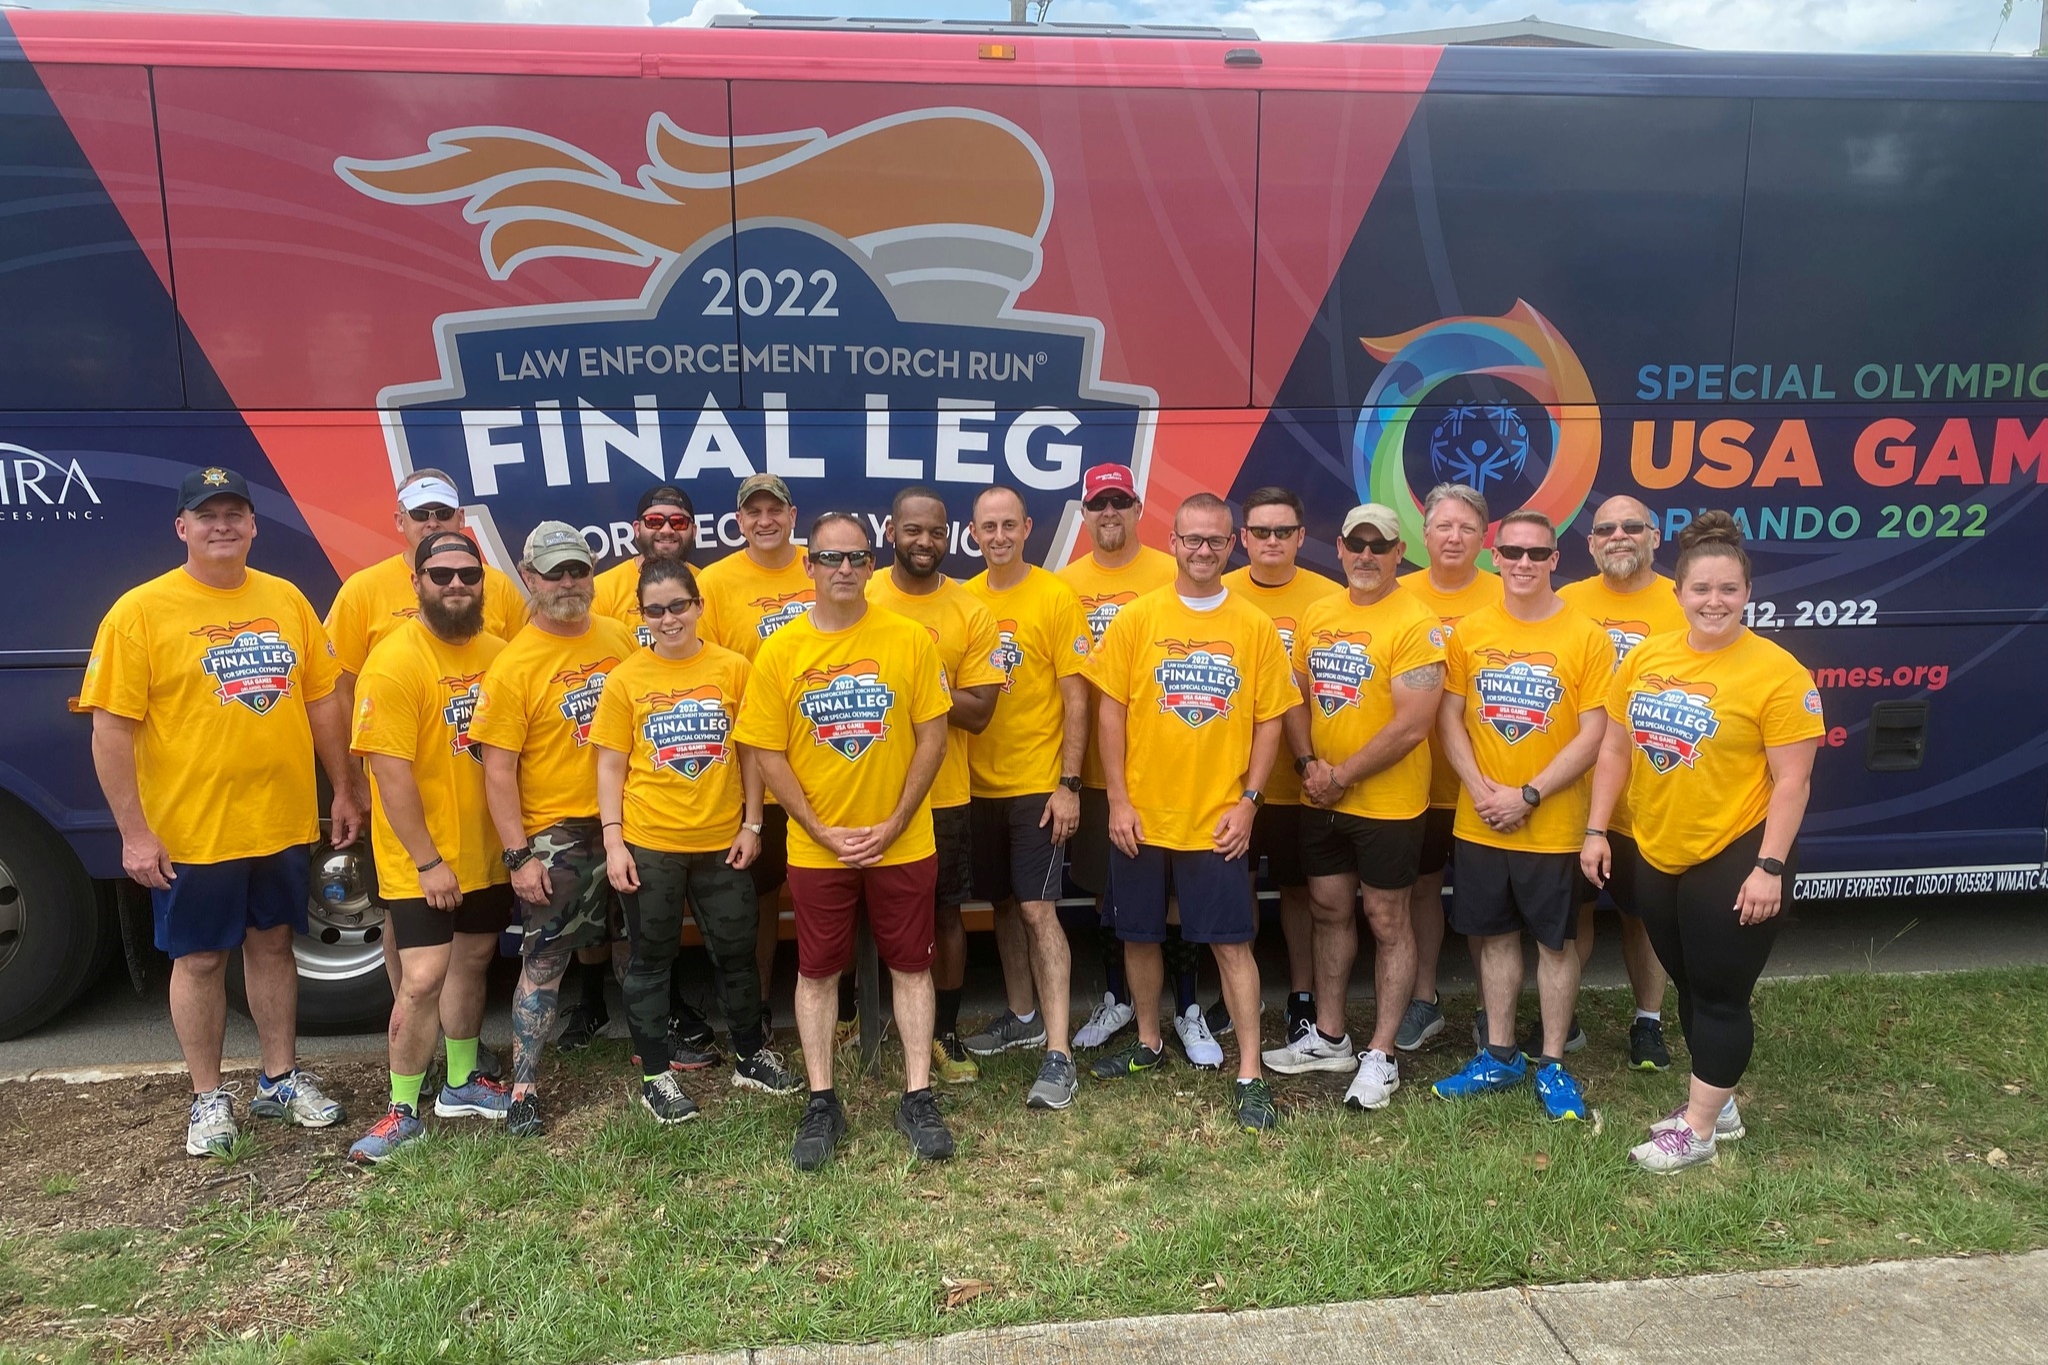 sheriff and deputies pose for picture after torch run